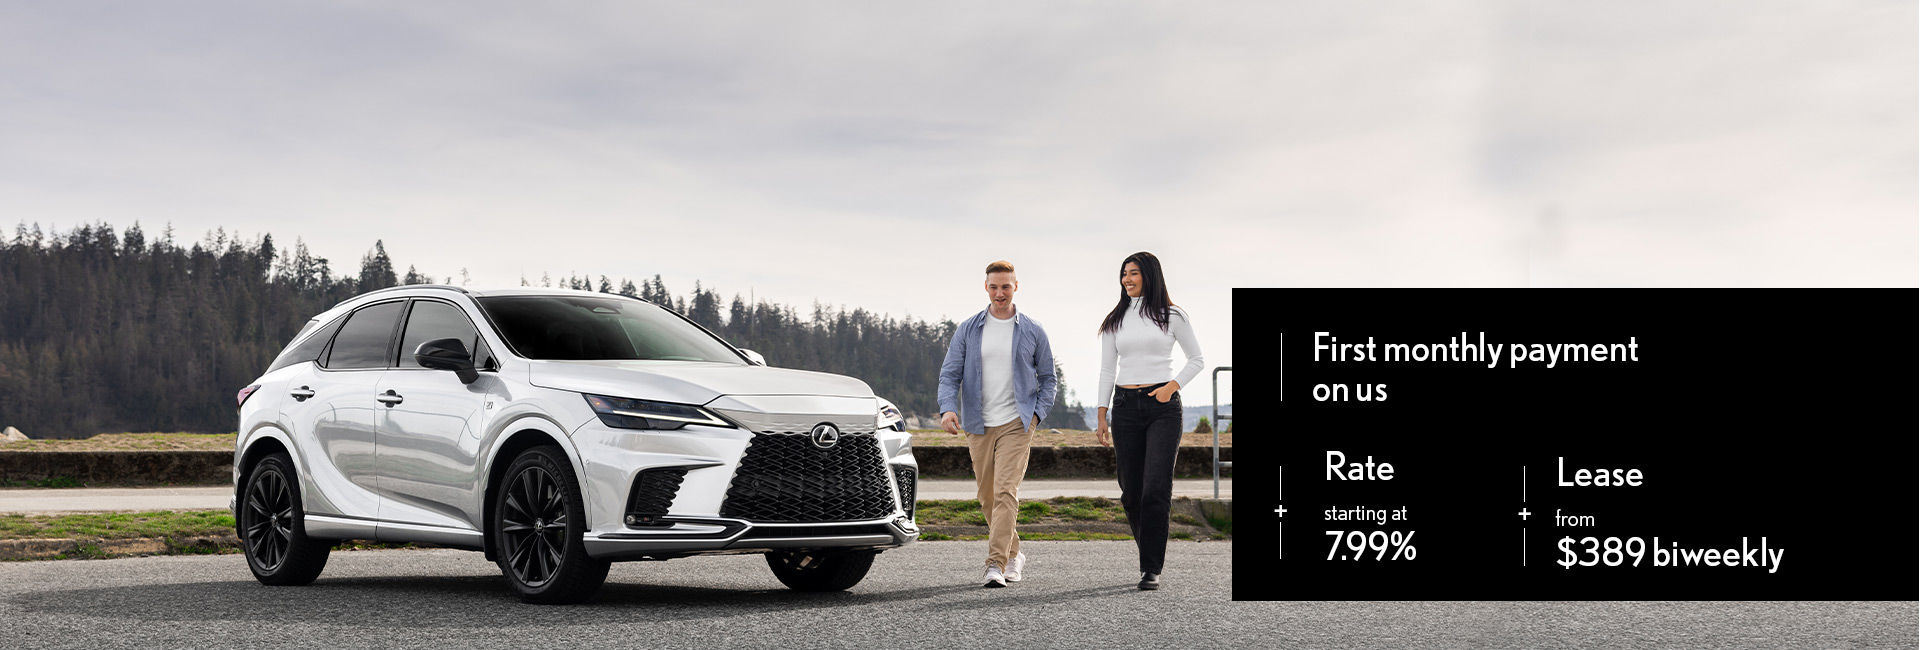 Hit the road with a RX certified pre-owned